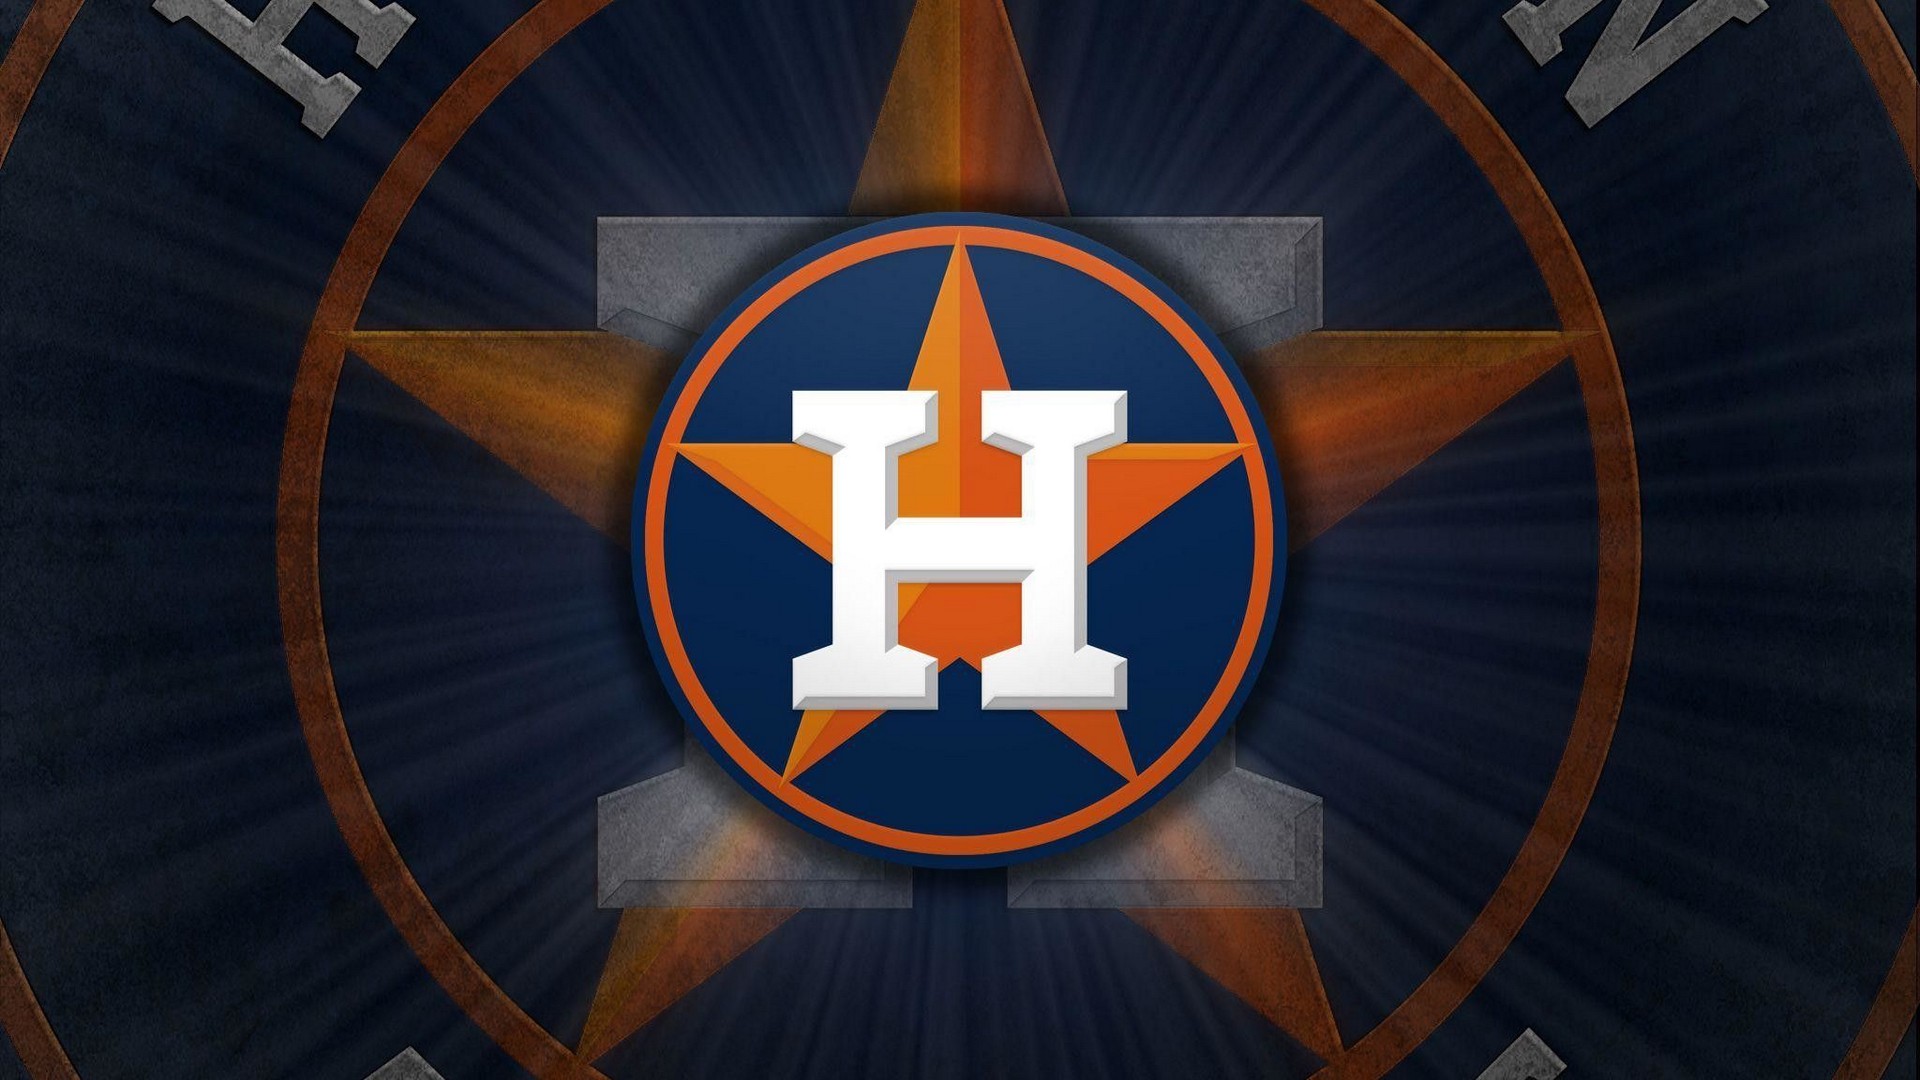 HD Desktop Wallpaper Houston Astros Logo With high-resolution 1920X1080 pixel. You can use this wallpaper for Mac Desktop Wallpaper, Laptop Screensavers, Android Wallpapers, Tablet or iPhone Home Screen and another mobile phone device